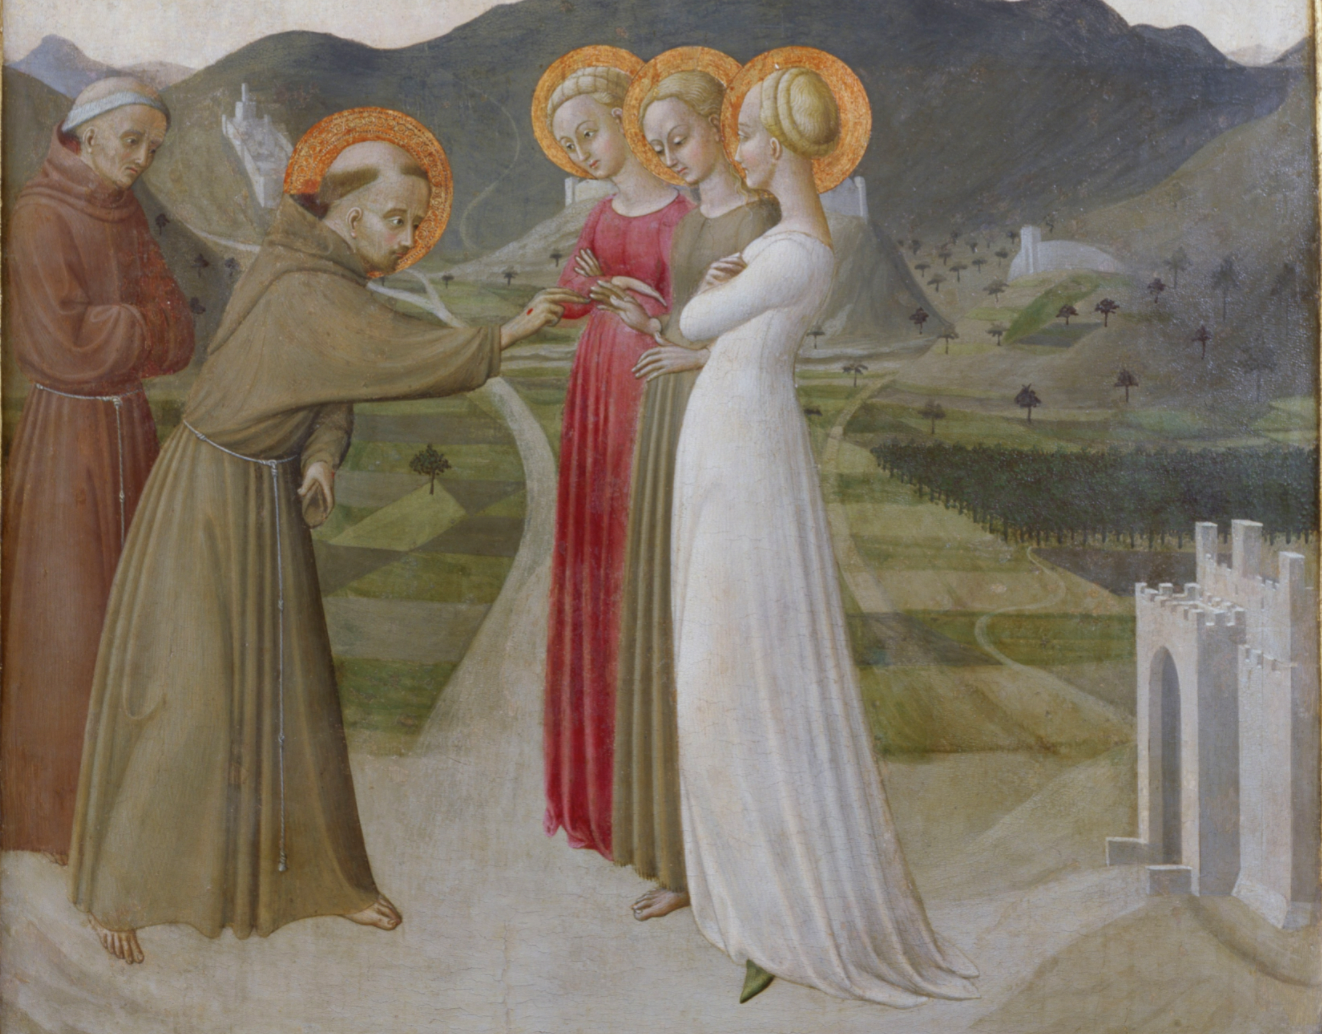 The Mystical Marriage of Saint Francis of Assisi (1437–1444) by Stefano di Giovanni - Public Domain Catholic Painting